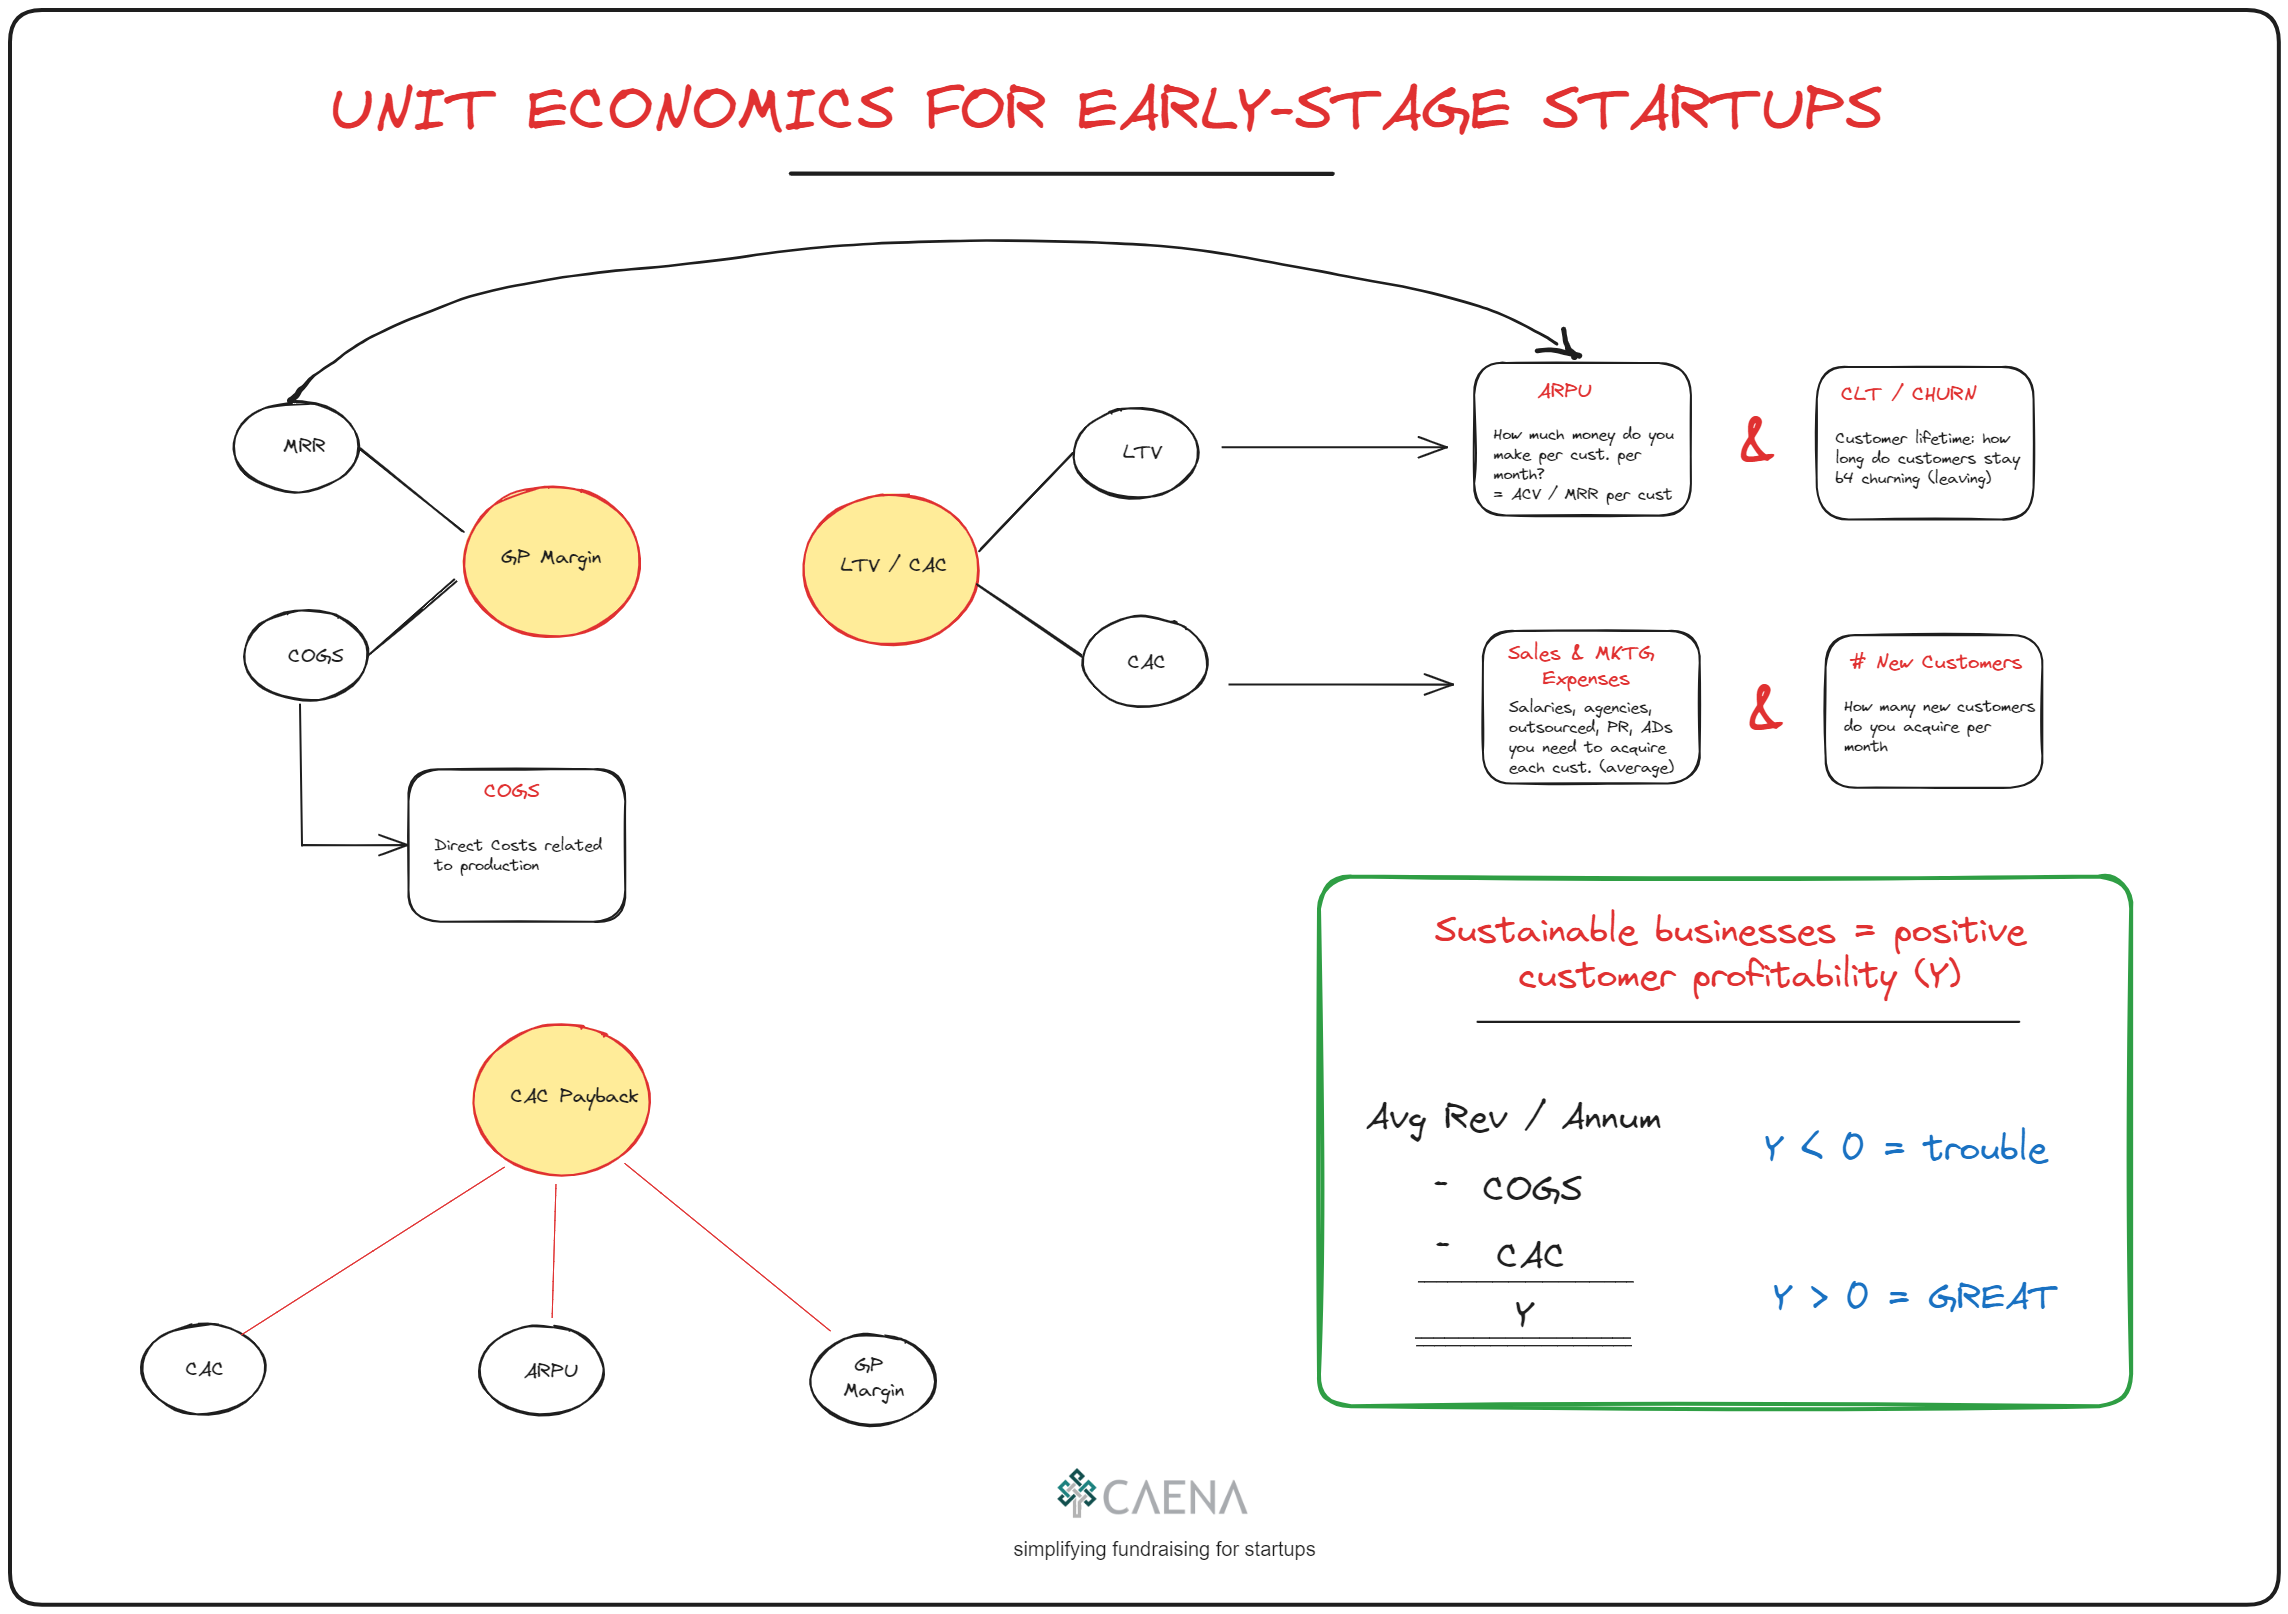 Unit economics explained for early-stage startups